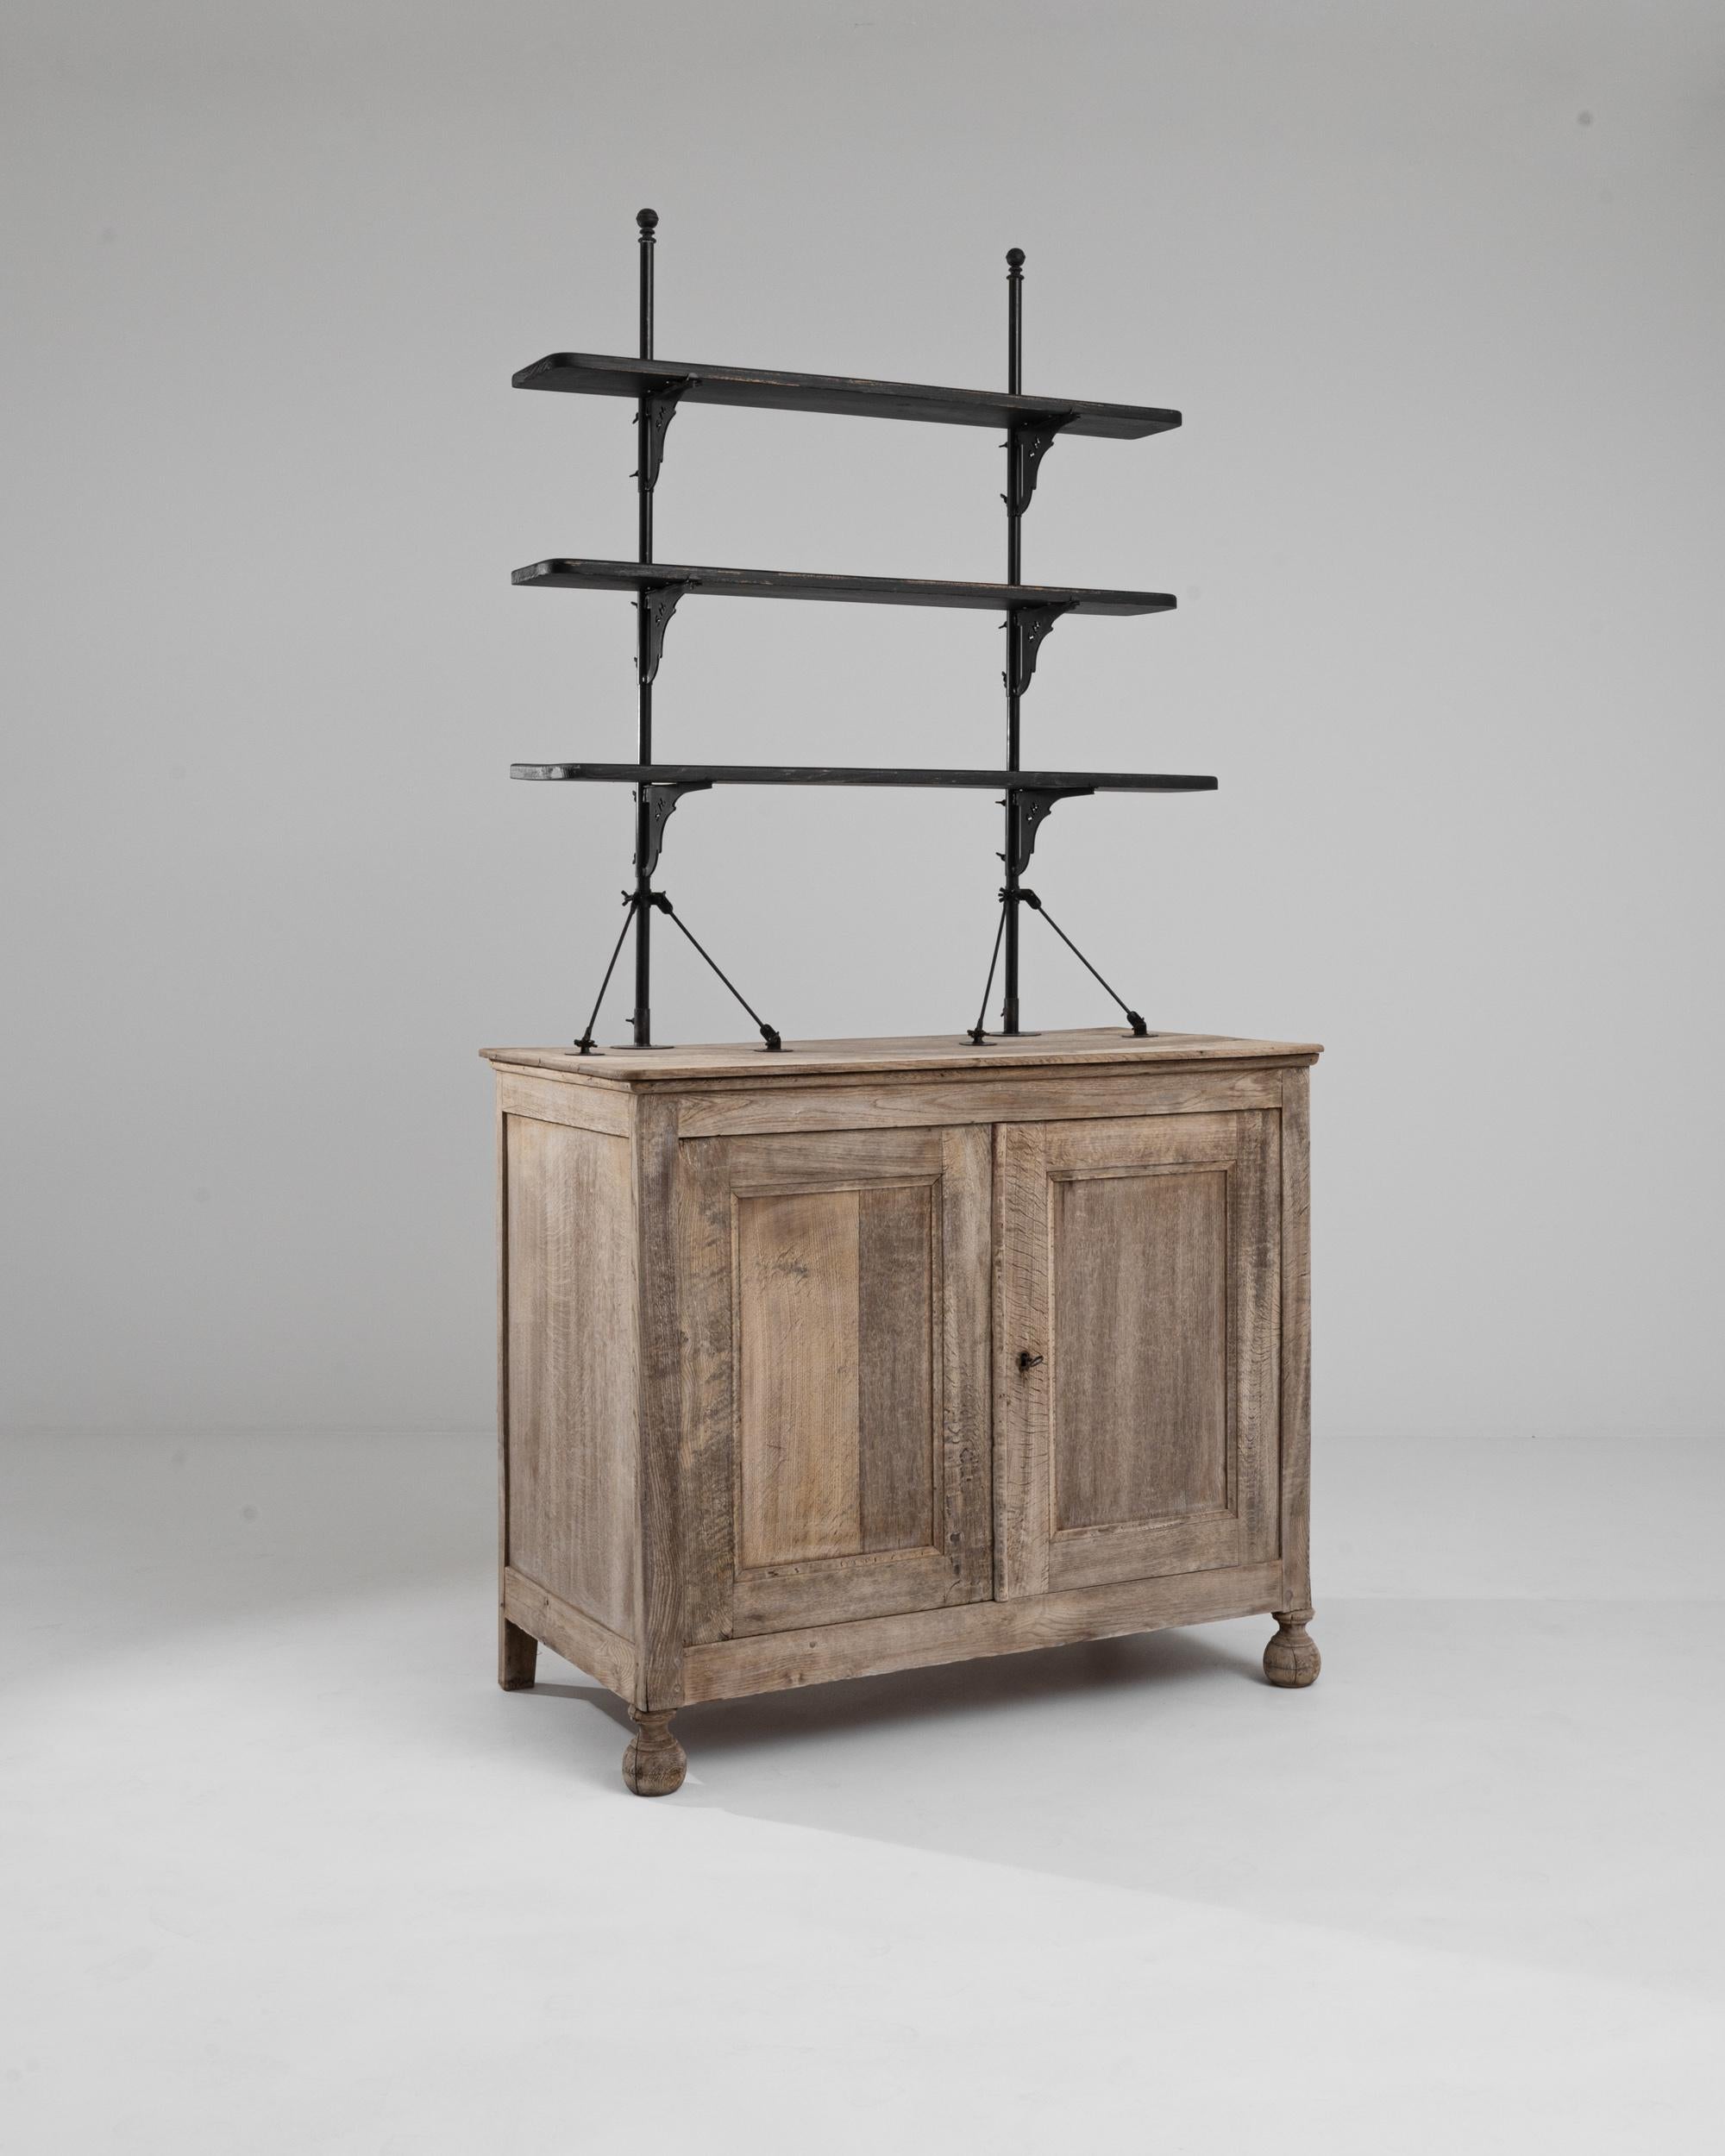 Made in France in the 19th century, this antique oak display cabinet offers a unique and practical silhouette. Three raised shelves are set upon slender metal posts to create an unobtrusive, pared-back open storage concept. The elegant shape of the